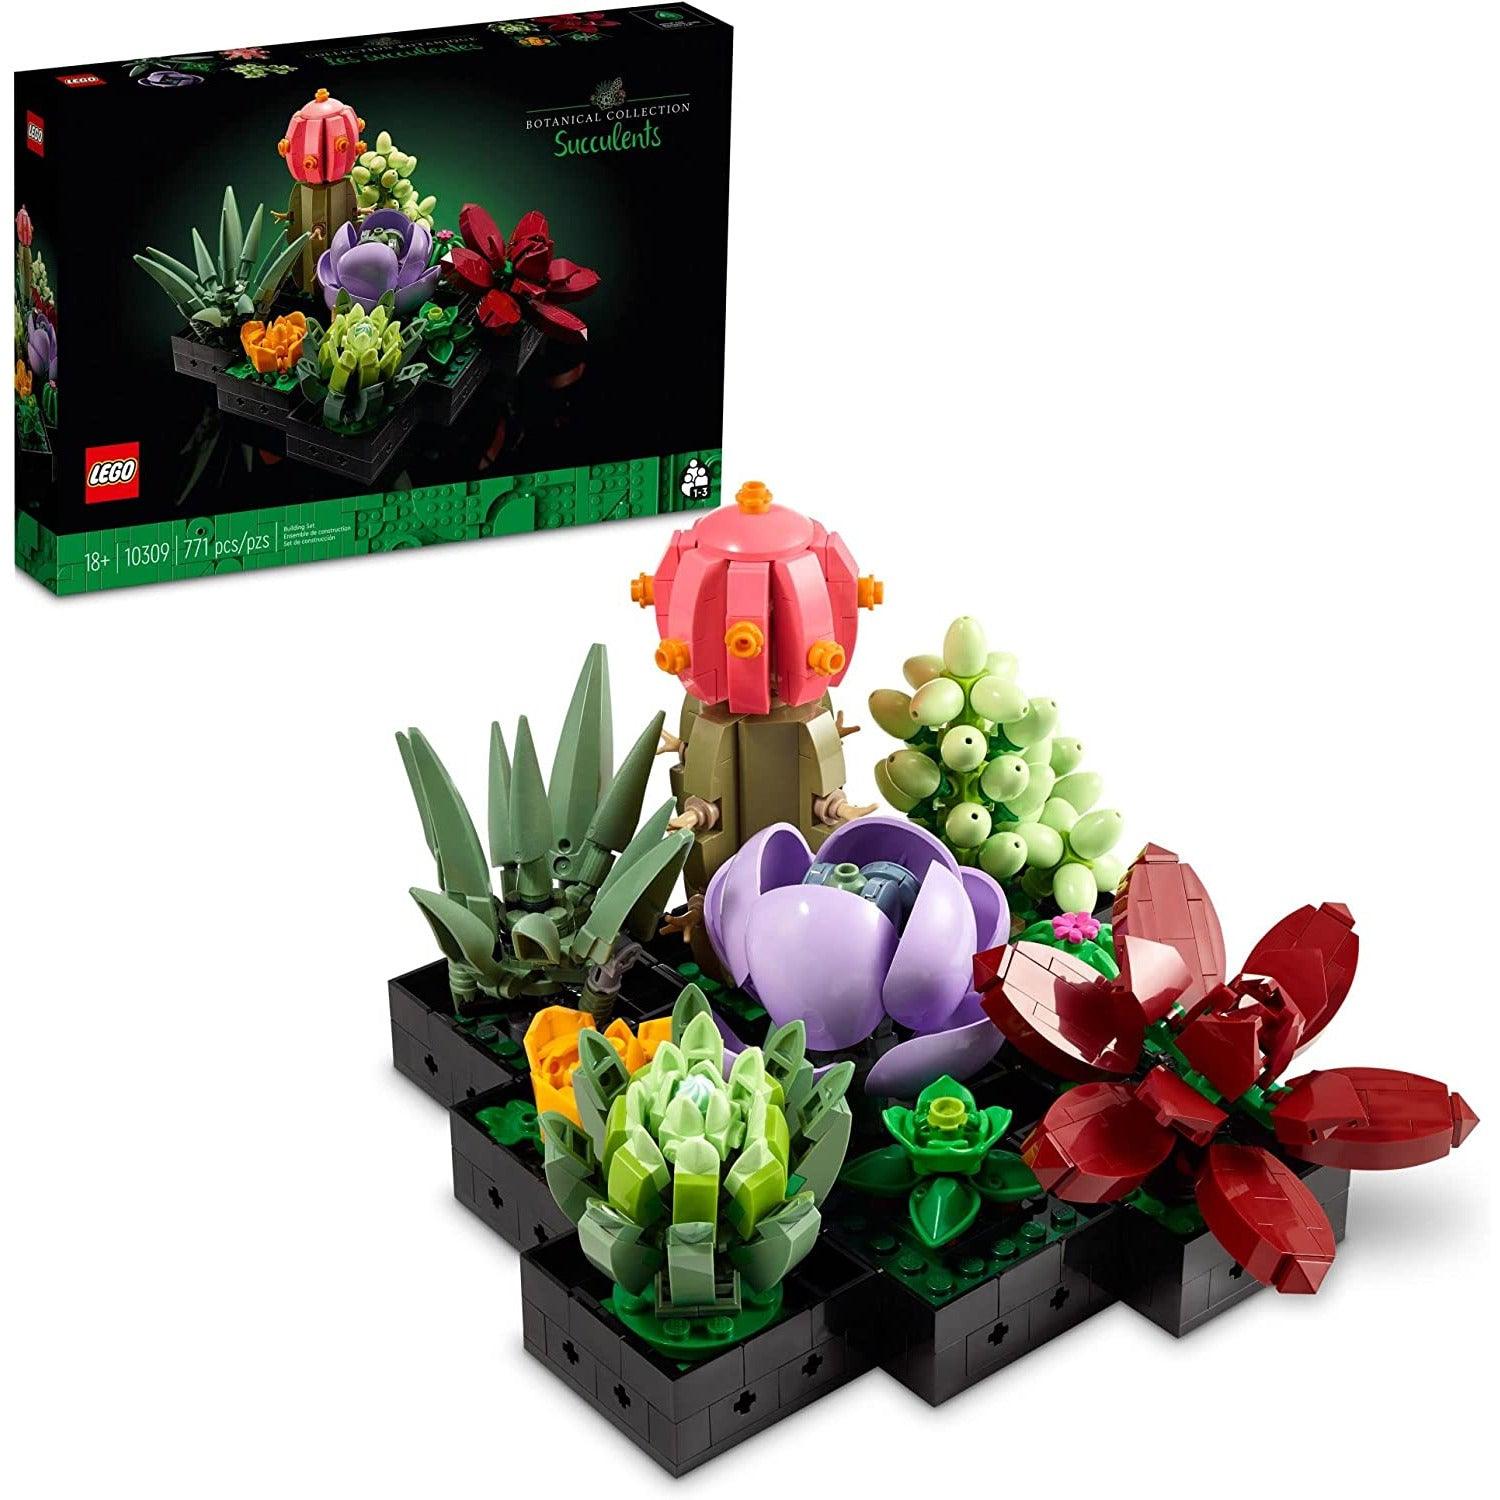 LEGO Icons Succulents 10309 Artificial Plants Set for Adults, Valentines Day Gifts, Home Décor, Creative Gift Idea (771 Pieces) - BumbleToys - +18, 14 Years & Up, 8+ Years, Girls, Icons, Ideas, LEGO, OXE, Pre-Order